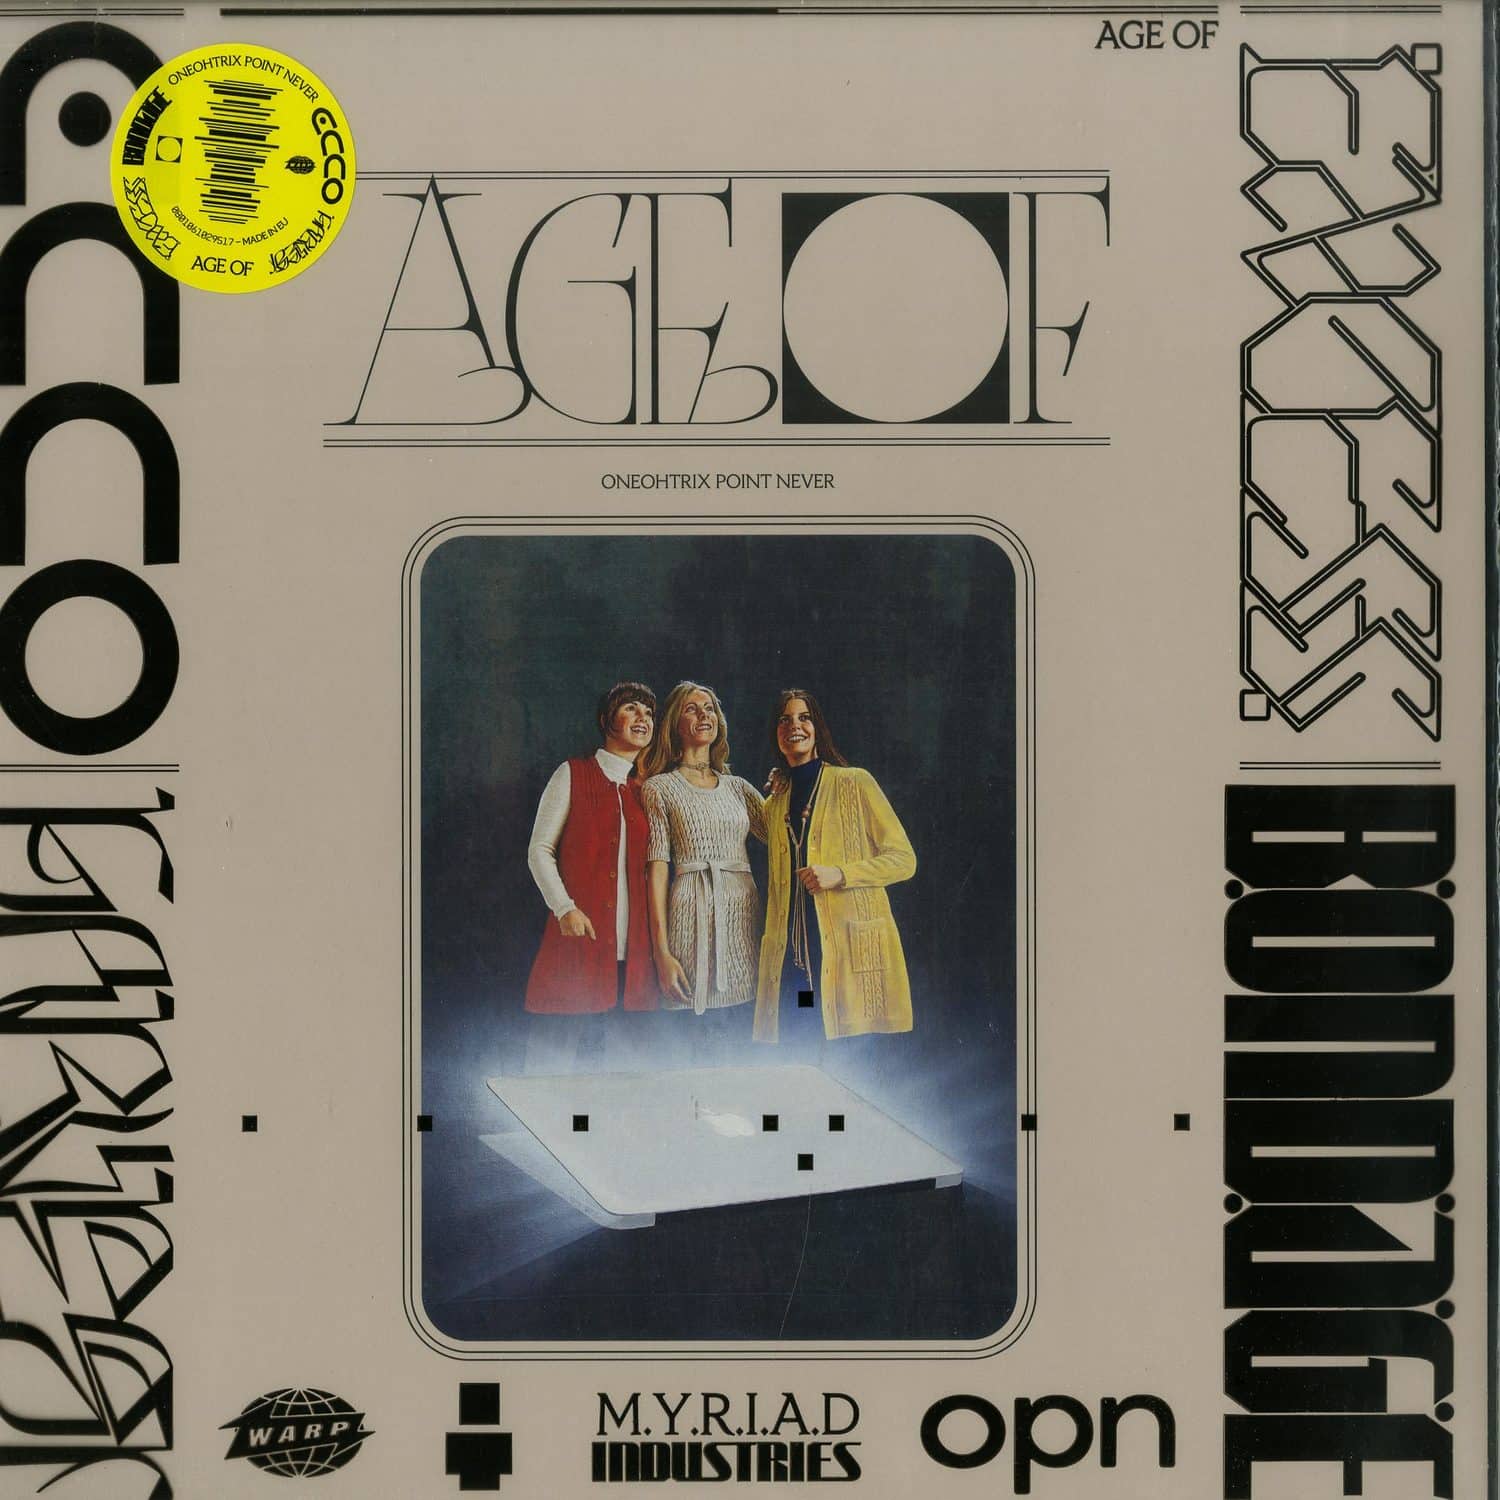 Oneohtrix Point Never - AGE OF 